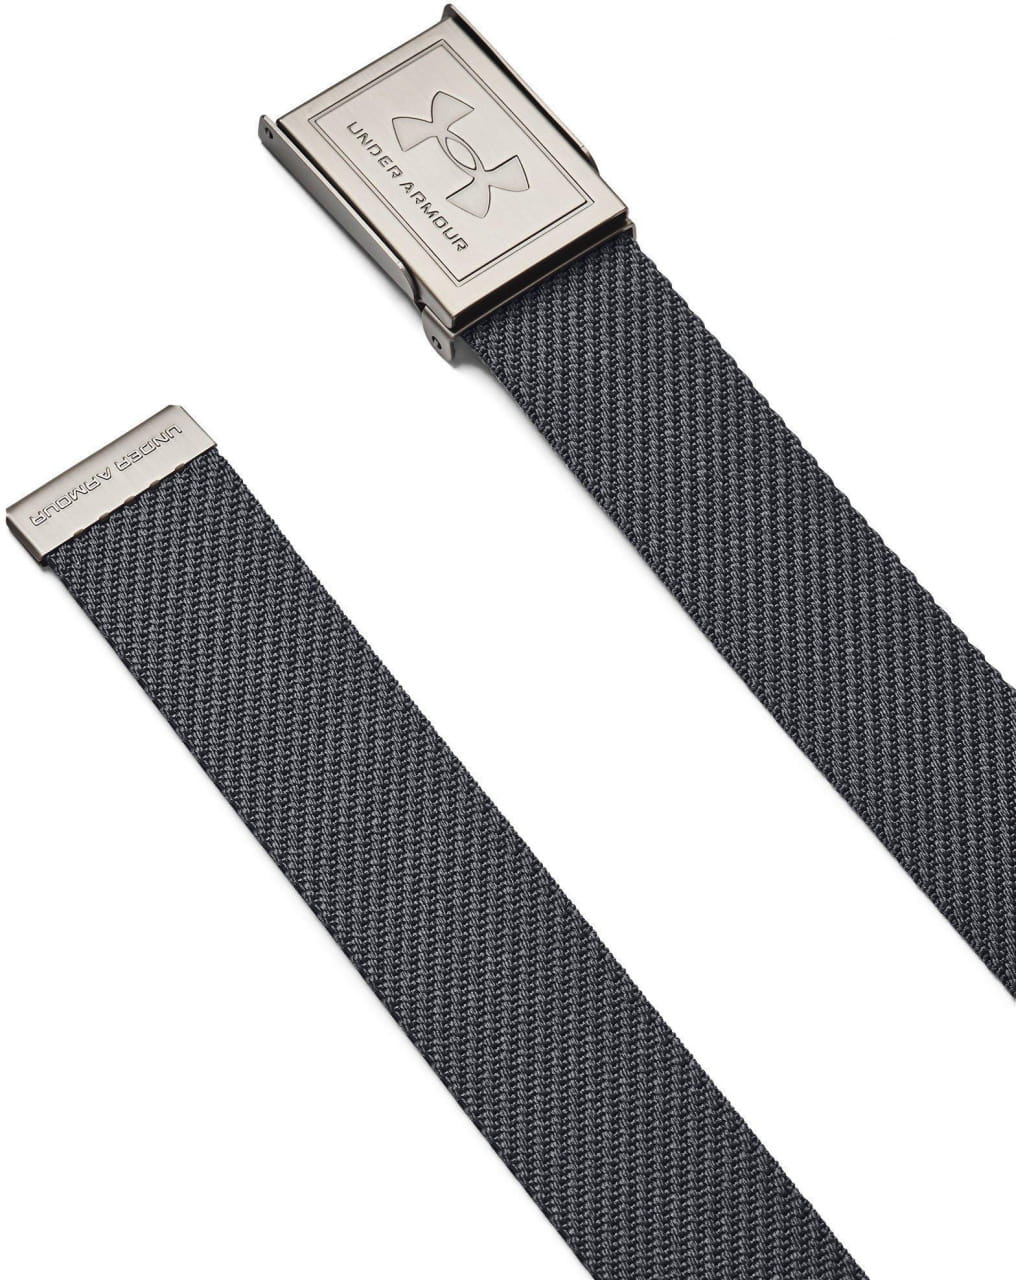 Heren golfband Under Armour M's Webbing Belt-GRY